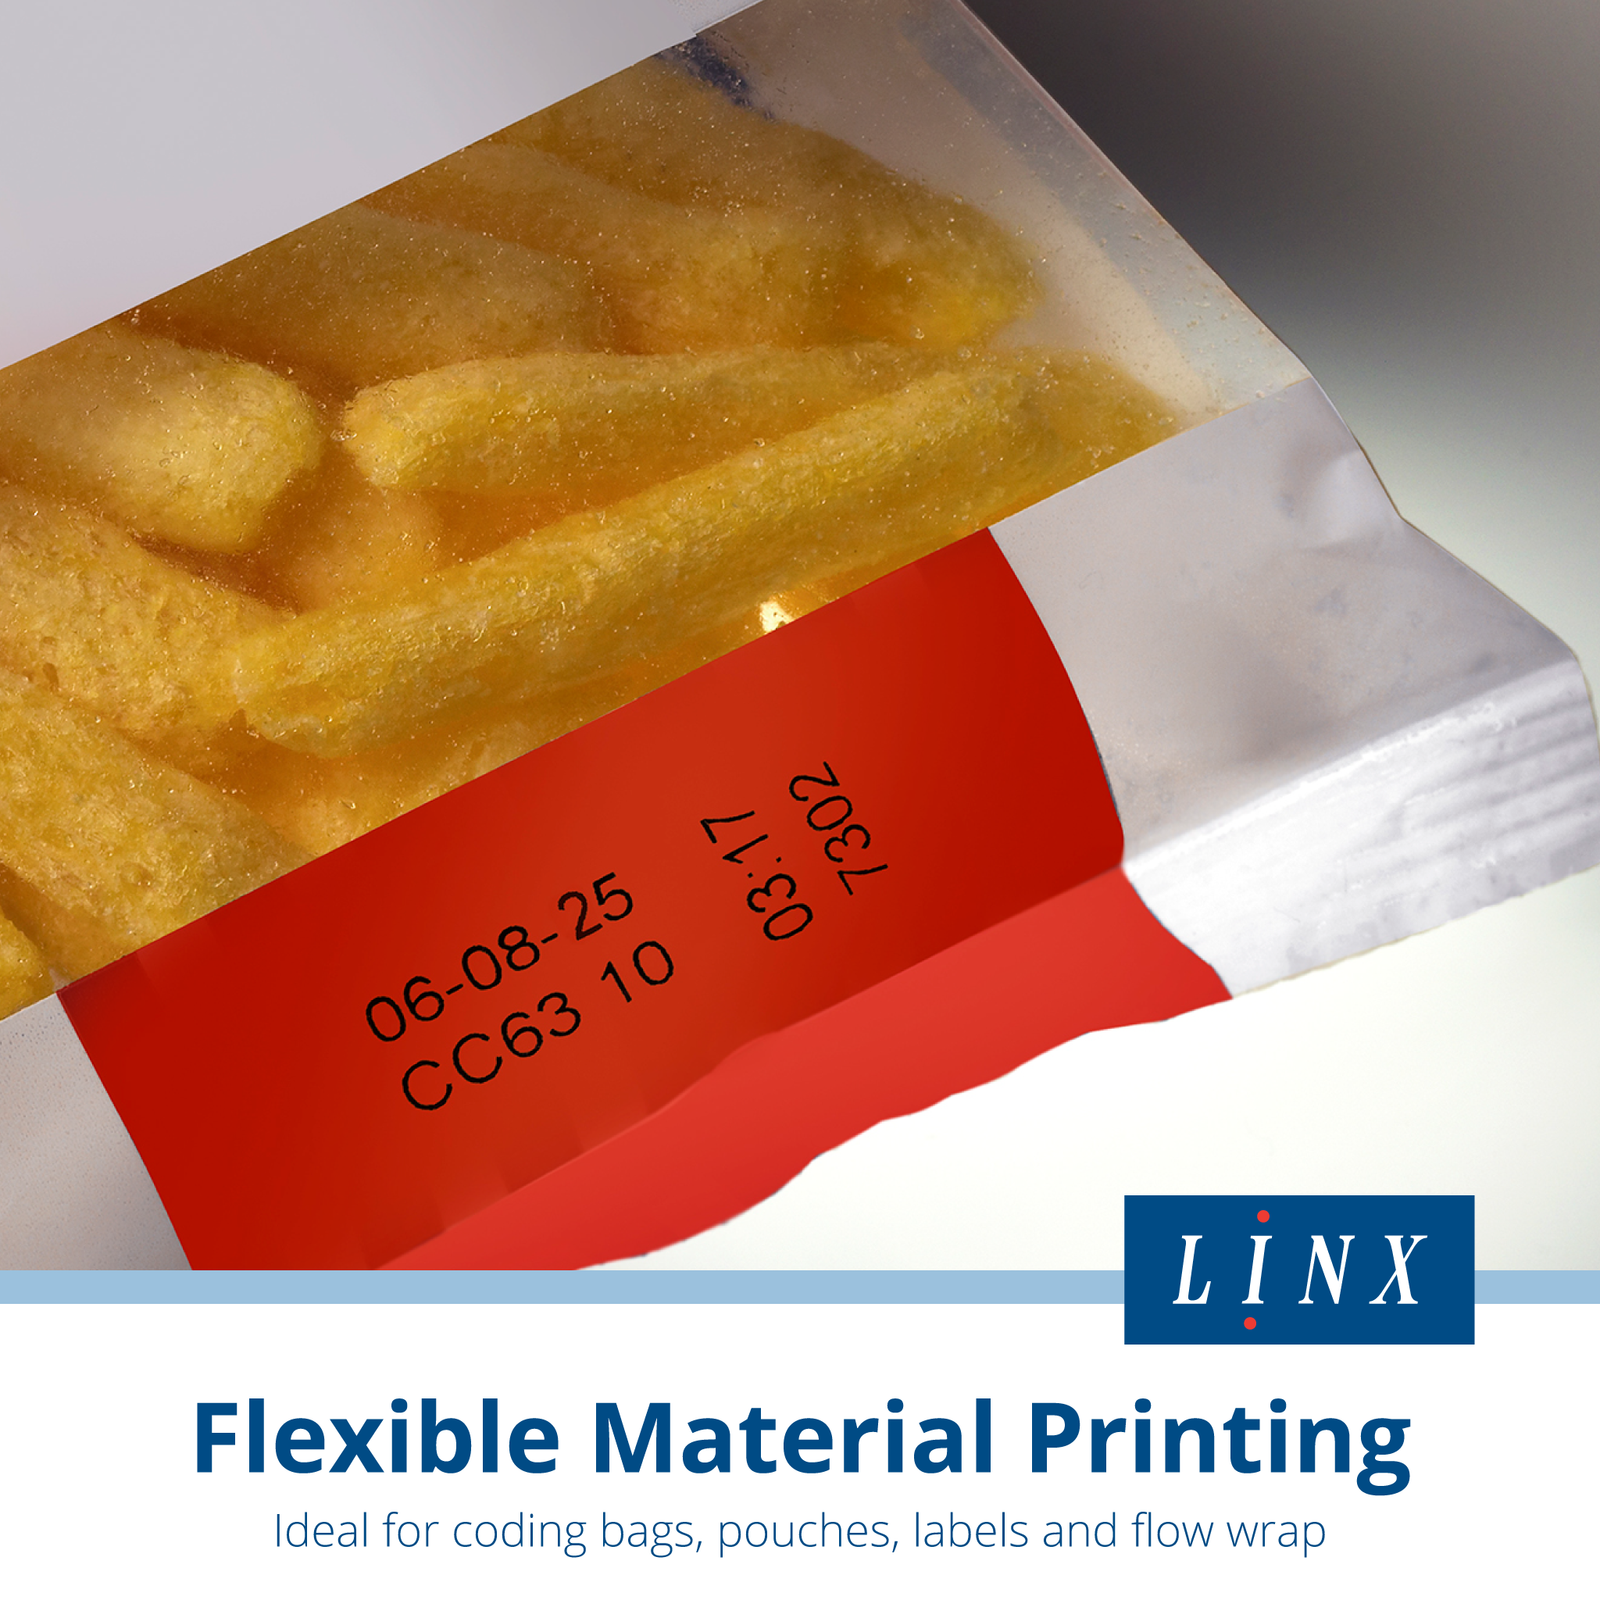 Date and lot number printed of a white and red sealed bag filled with food done with a thermal transfer over printer for narrow formats LINX TT500. Text reads: Flexible Material Printing, Ideal for coding bags, pouches, labels and flow wrap.